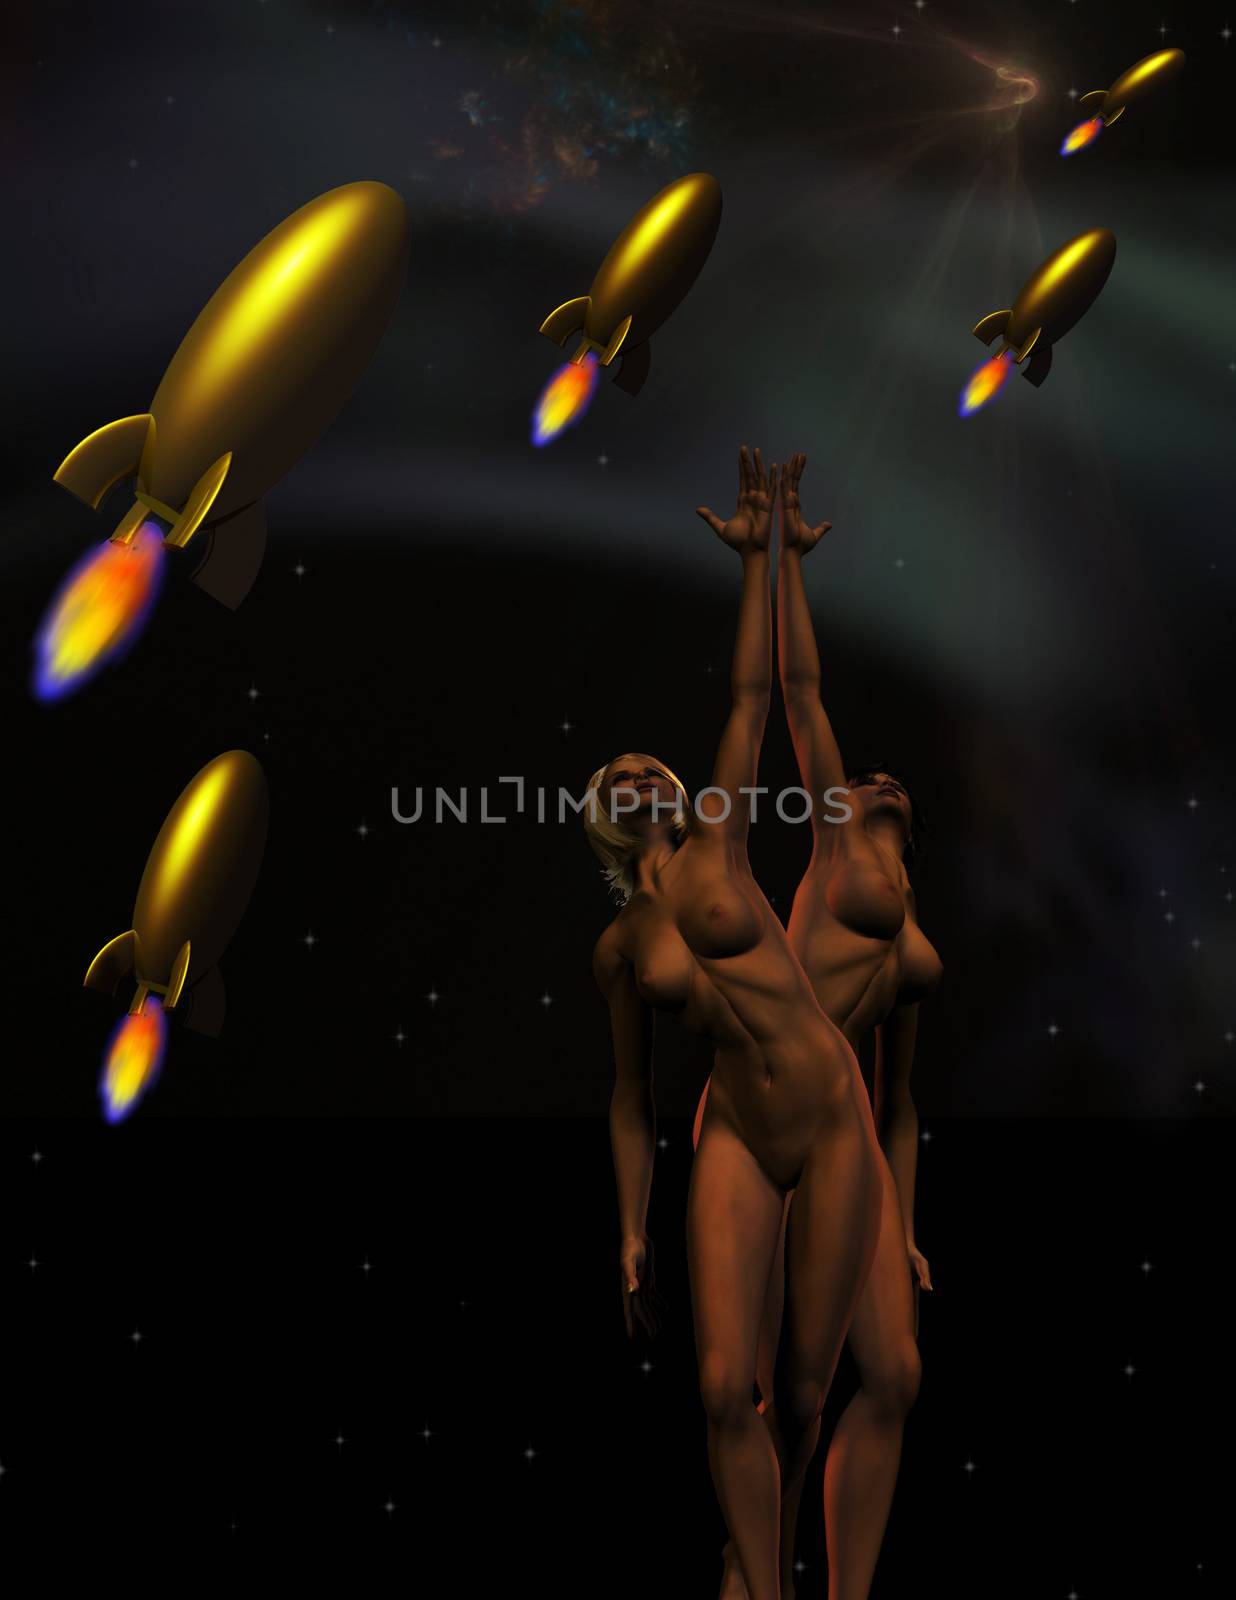 Retro Sci FI. Women aspire to the stars. Surreal rockets in the sky